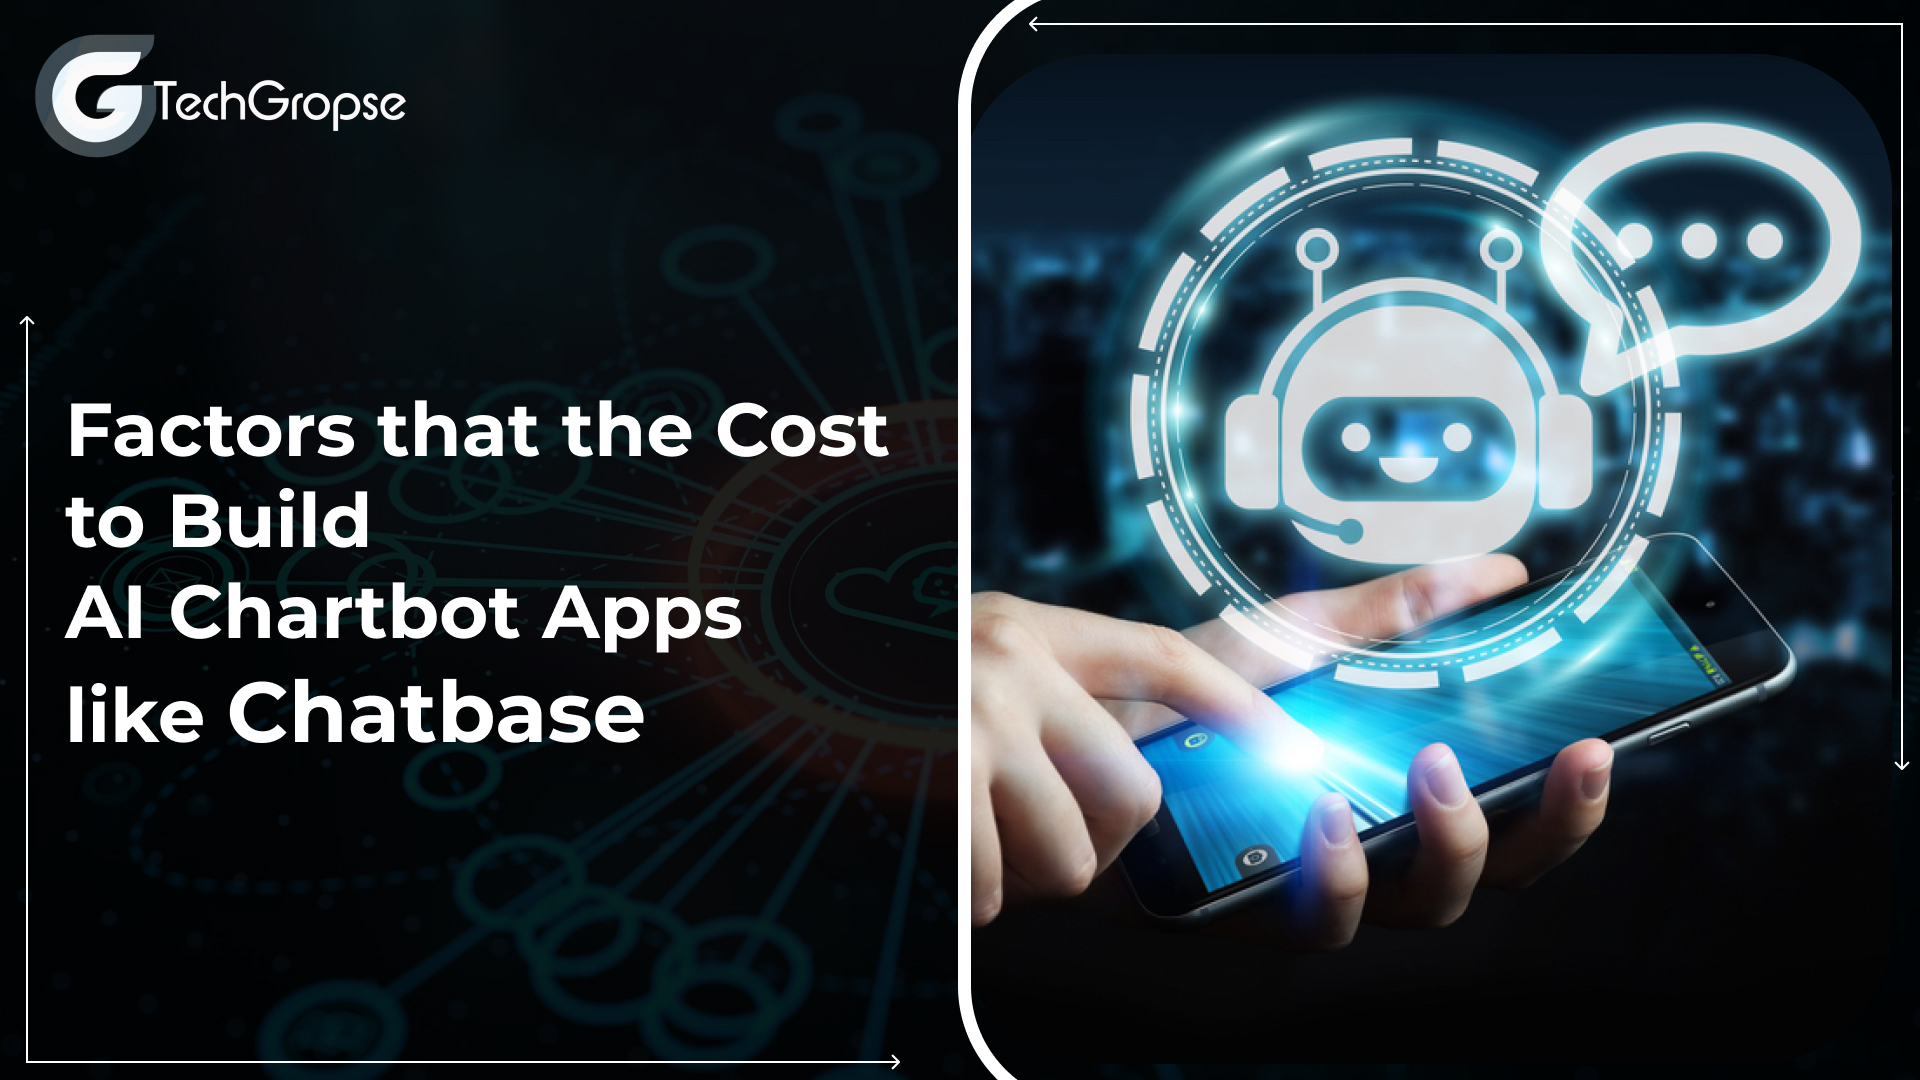 Factors that Affect the Cost to Build AI Chatbot Apps like Chatbase